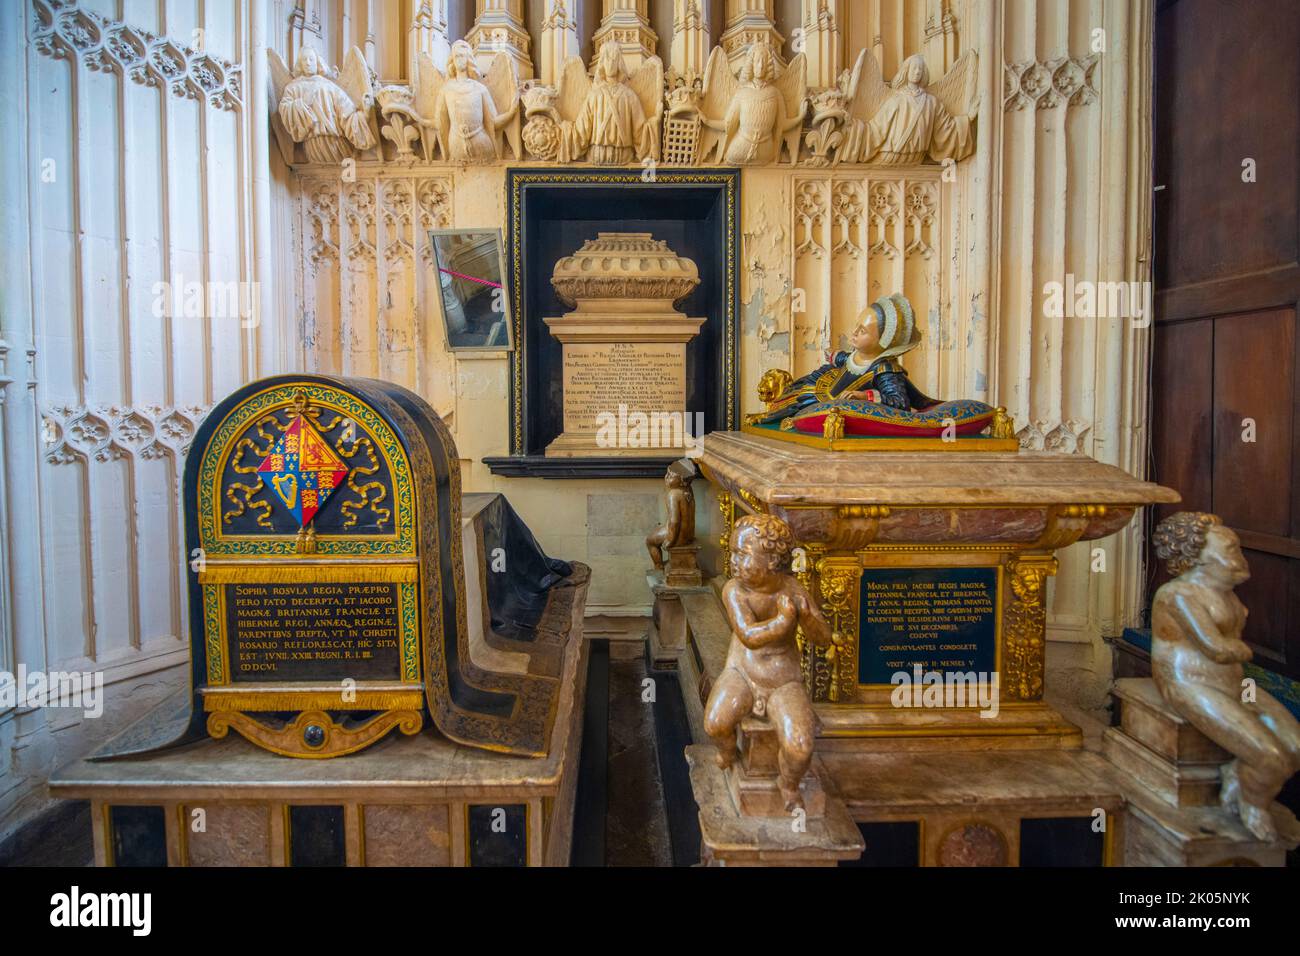 Tomb of Sophia and Mary, daughter of James I, in Westminster Abbey. The church is World Heritage Site next to Palace of Westminster in city of Westmin Stock Photo